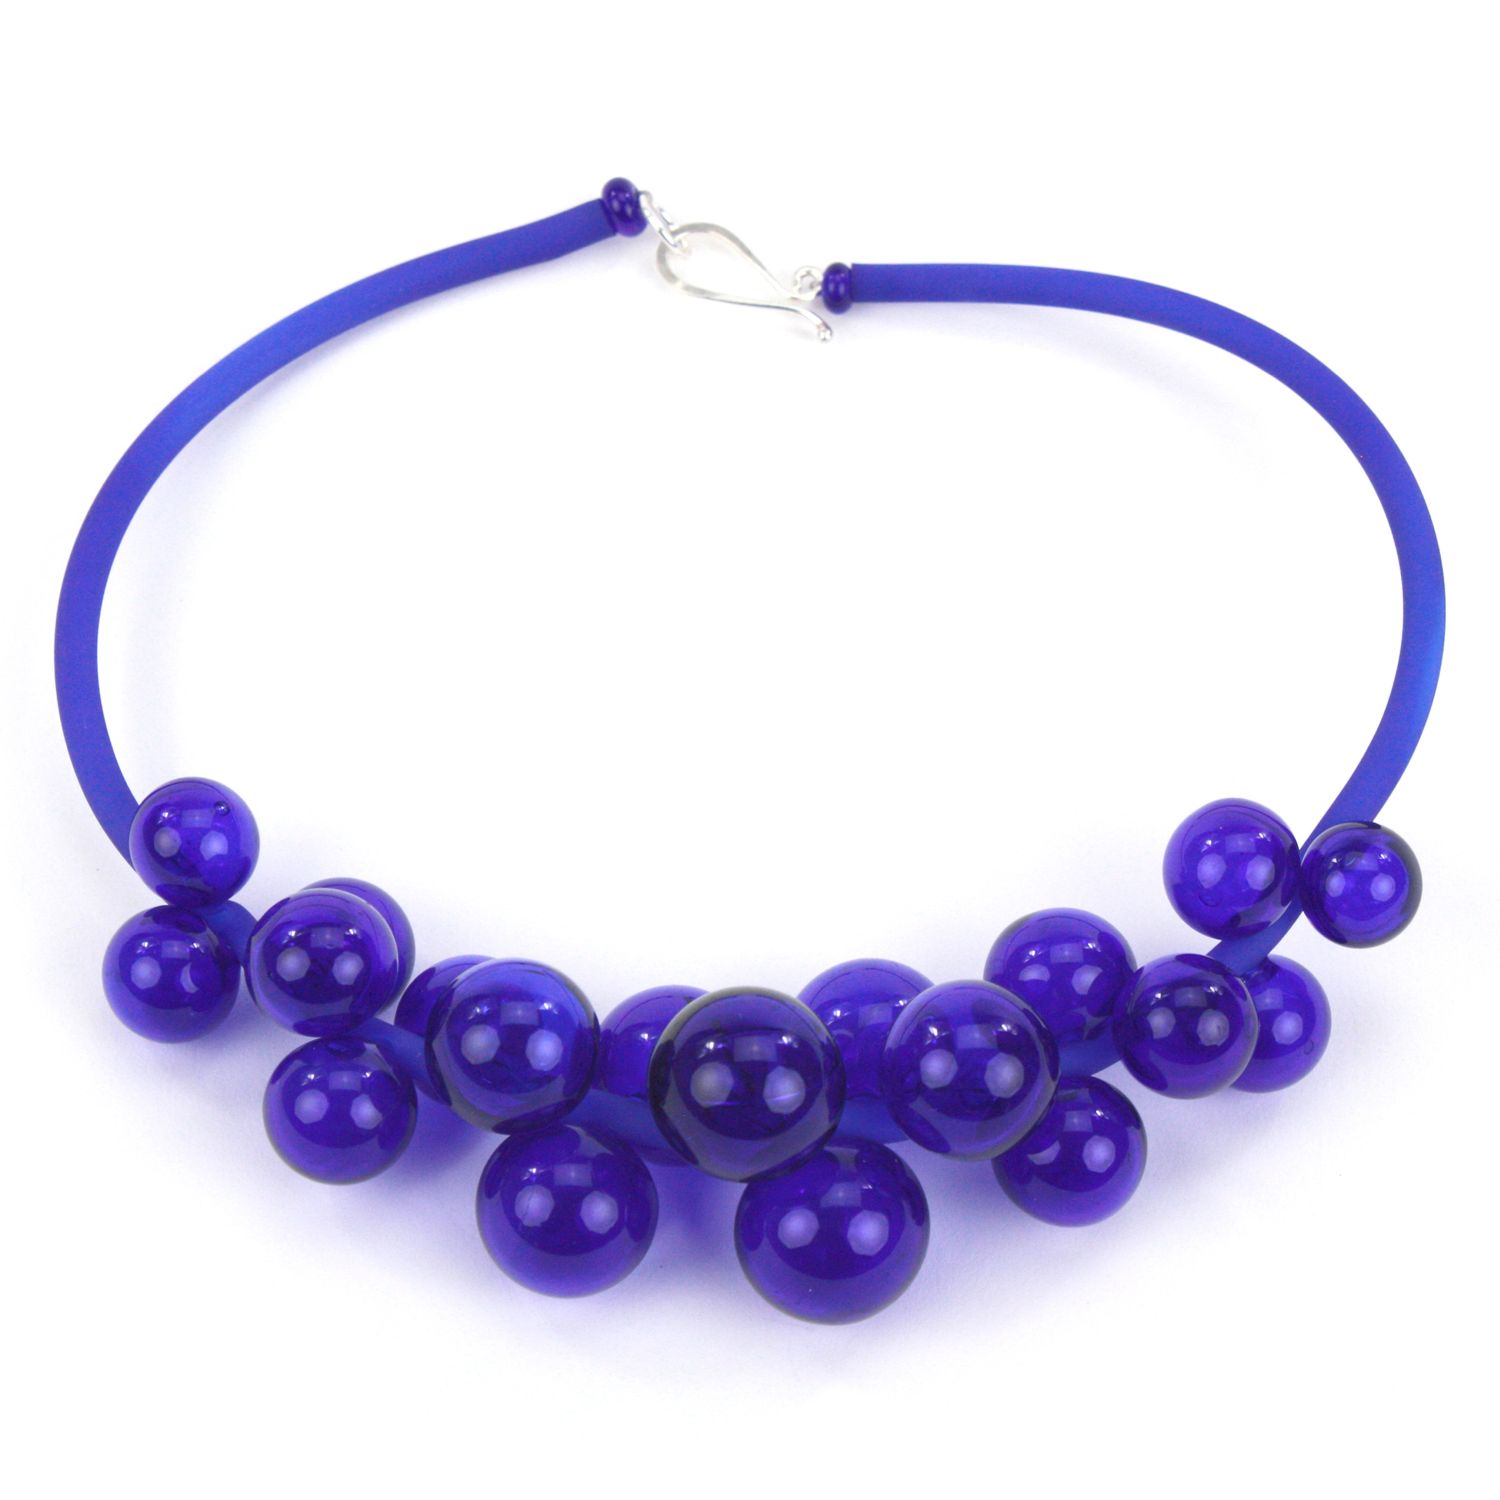 Alicia Niles: Chroma Bolla Necklace – Cobalt Product Image 3 of 3